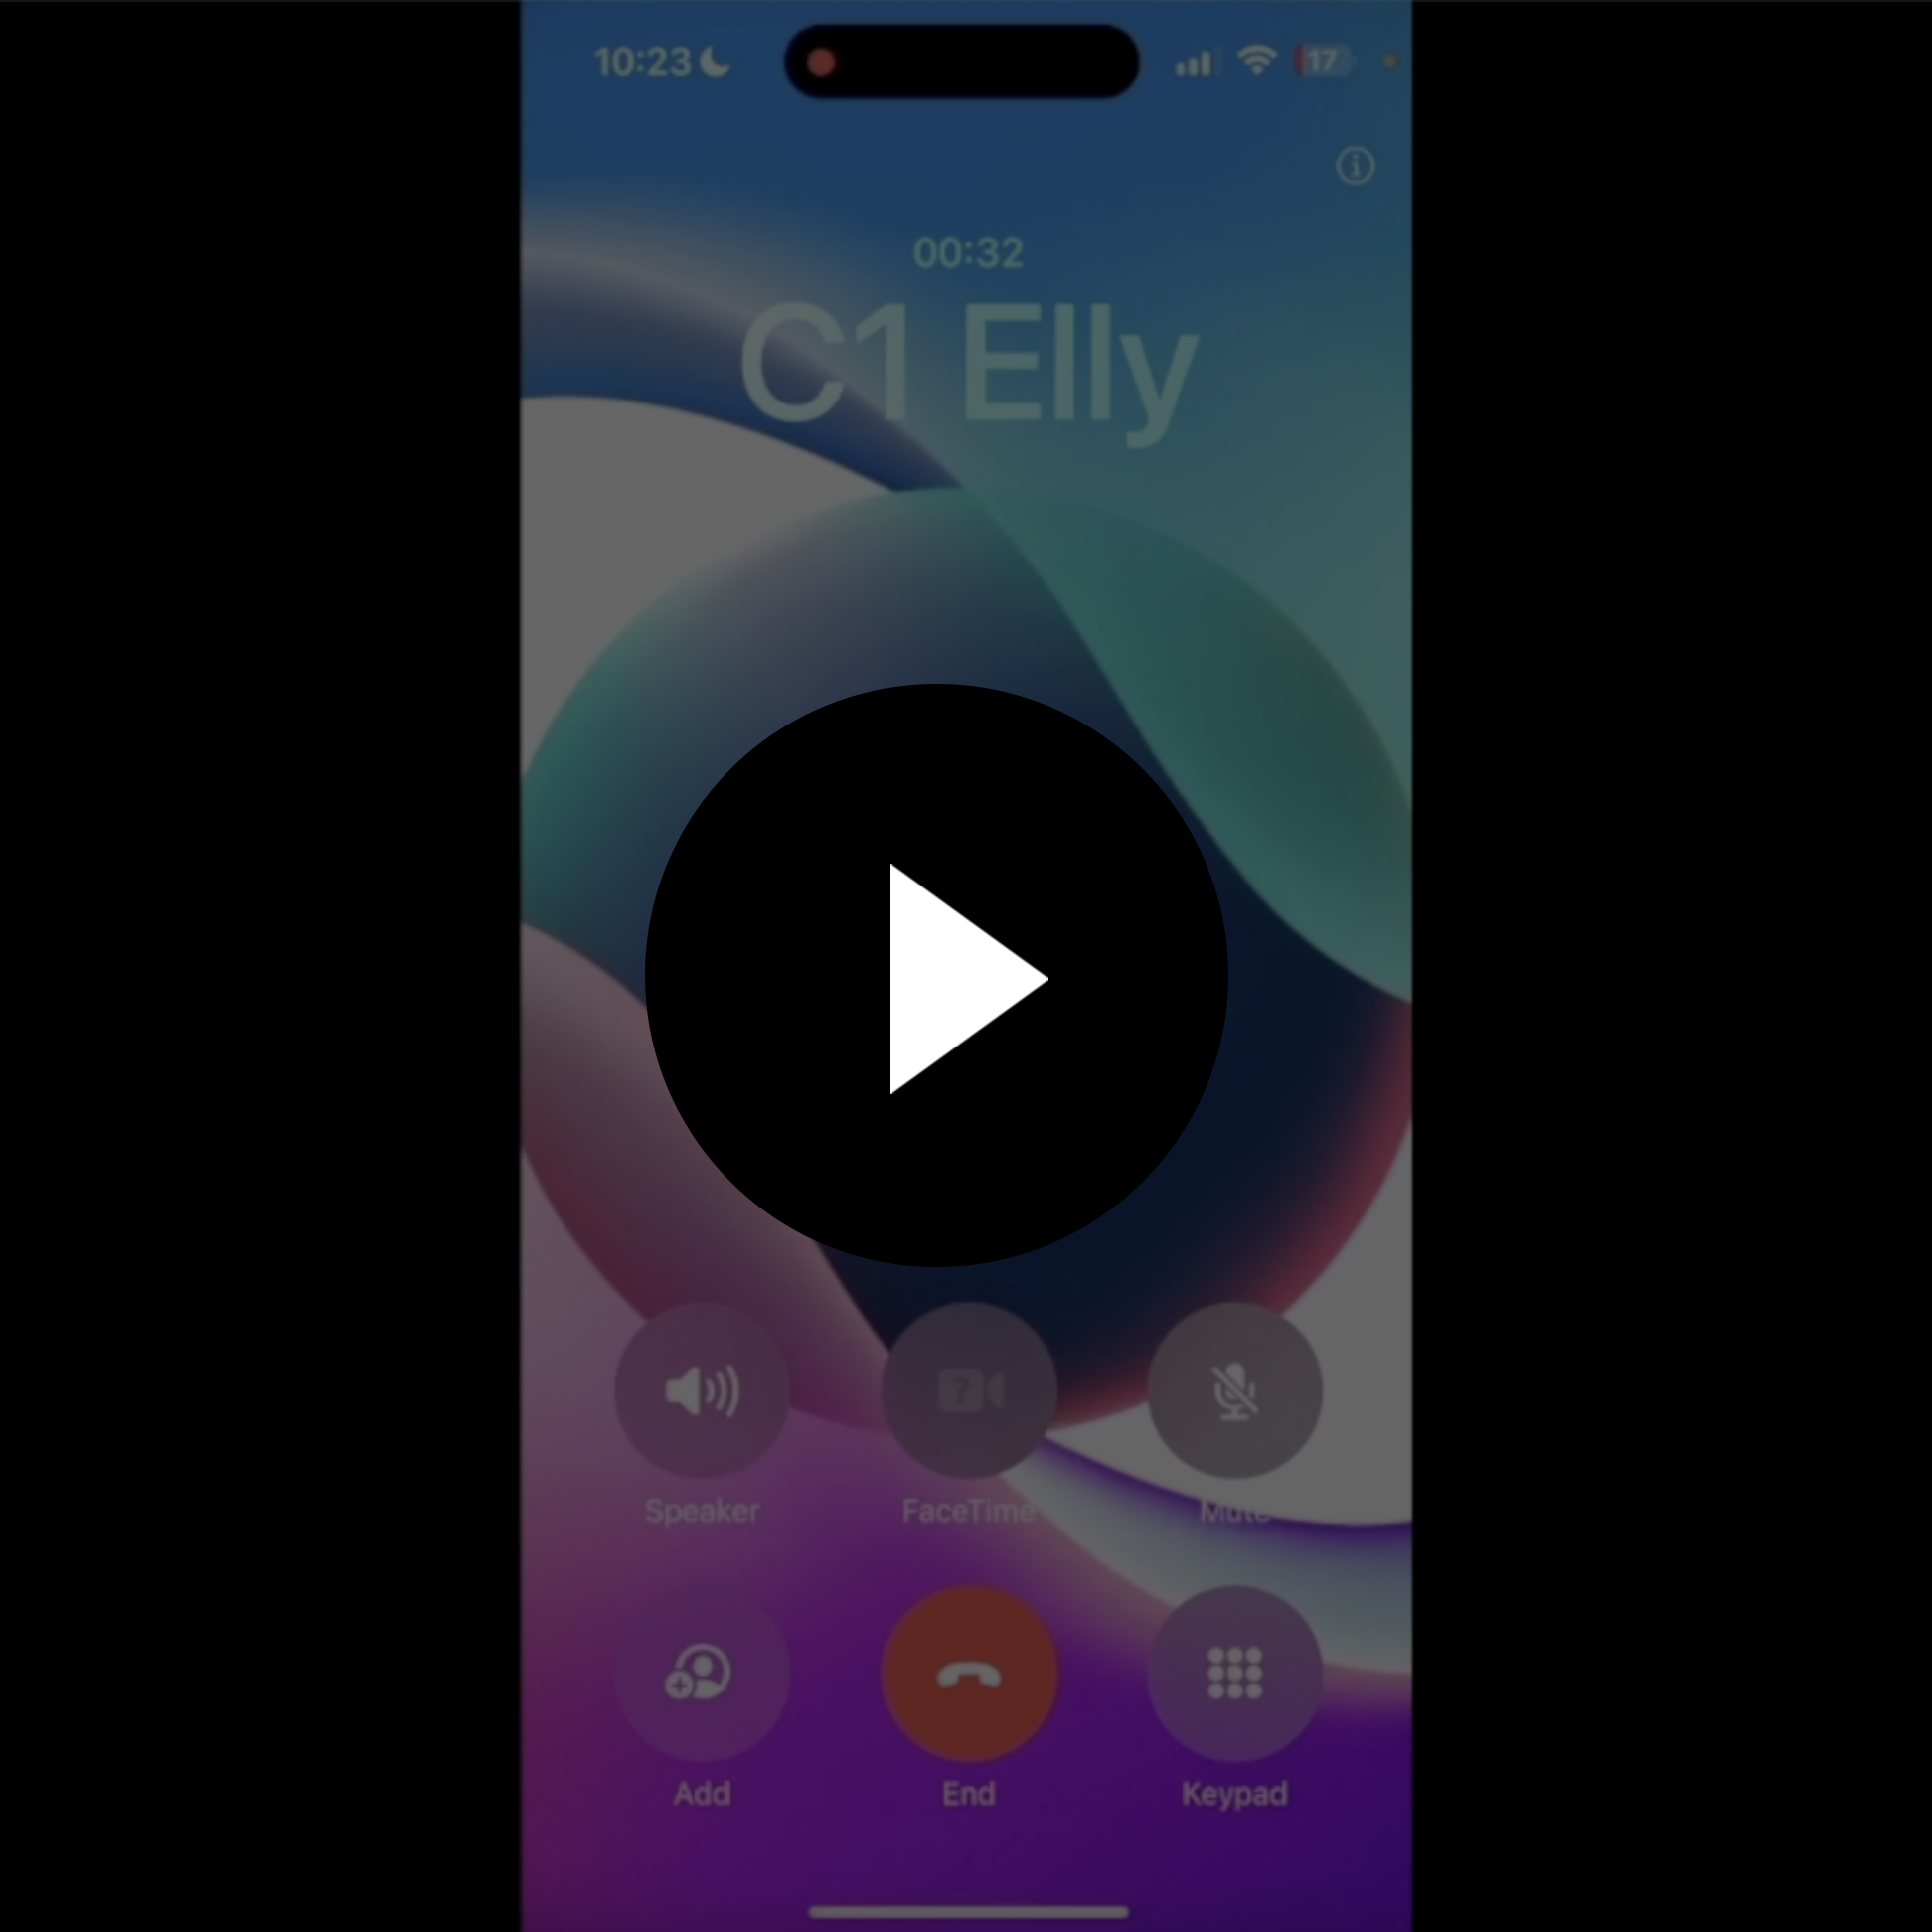 Watch: C1 Elly Automate Demo